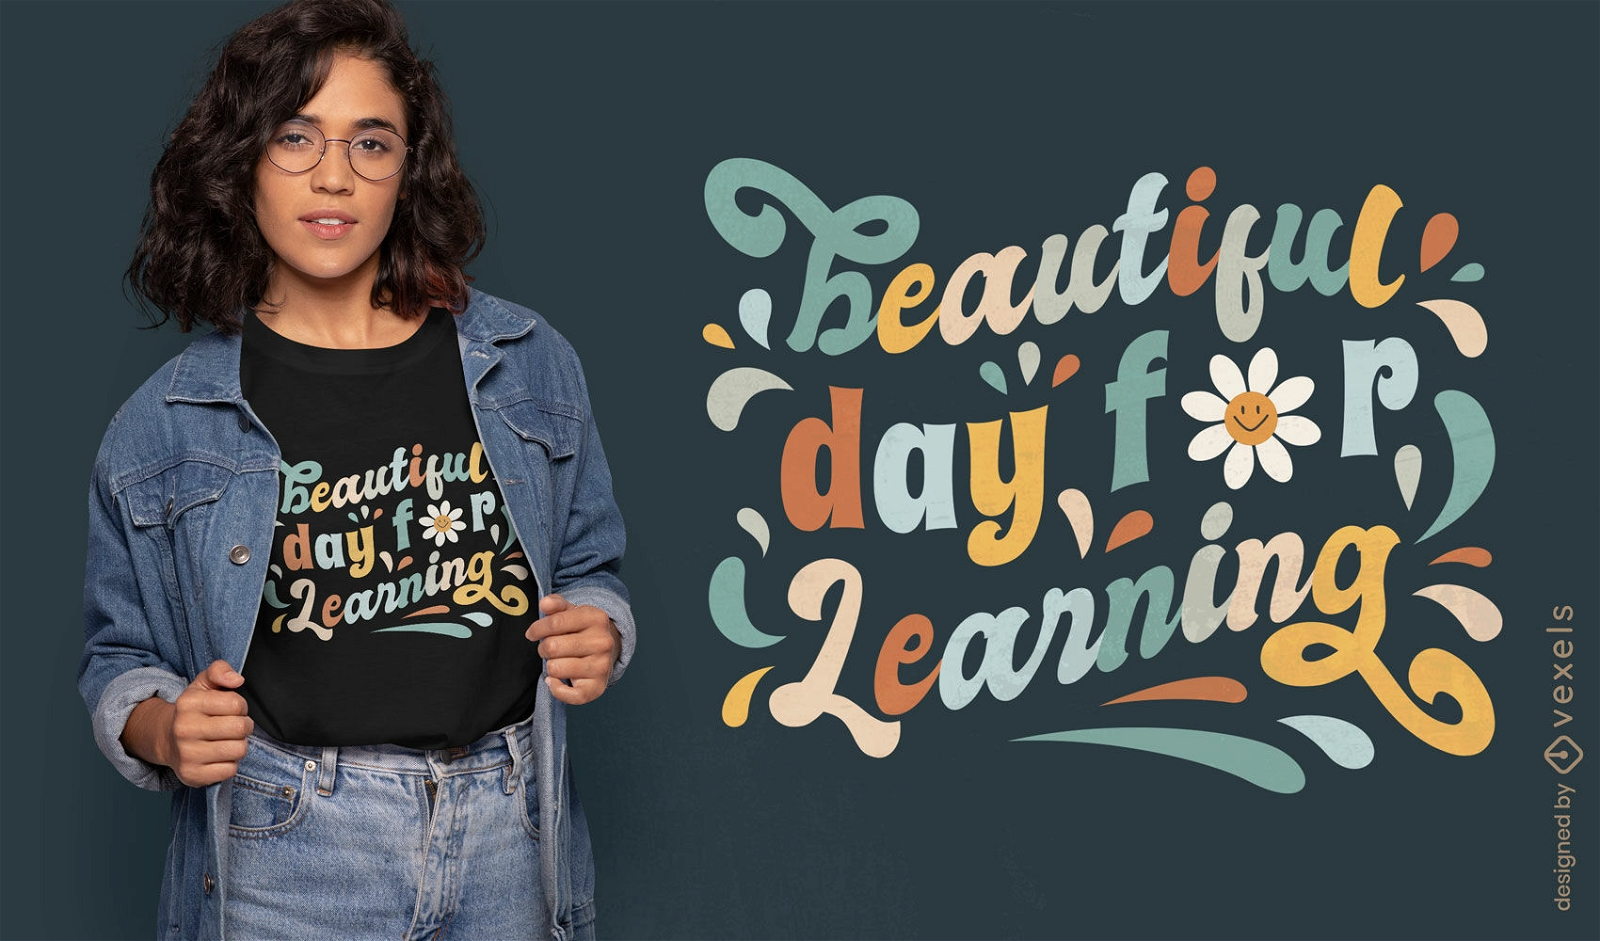 Learning quote lettering t-shirt design